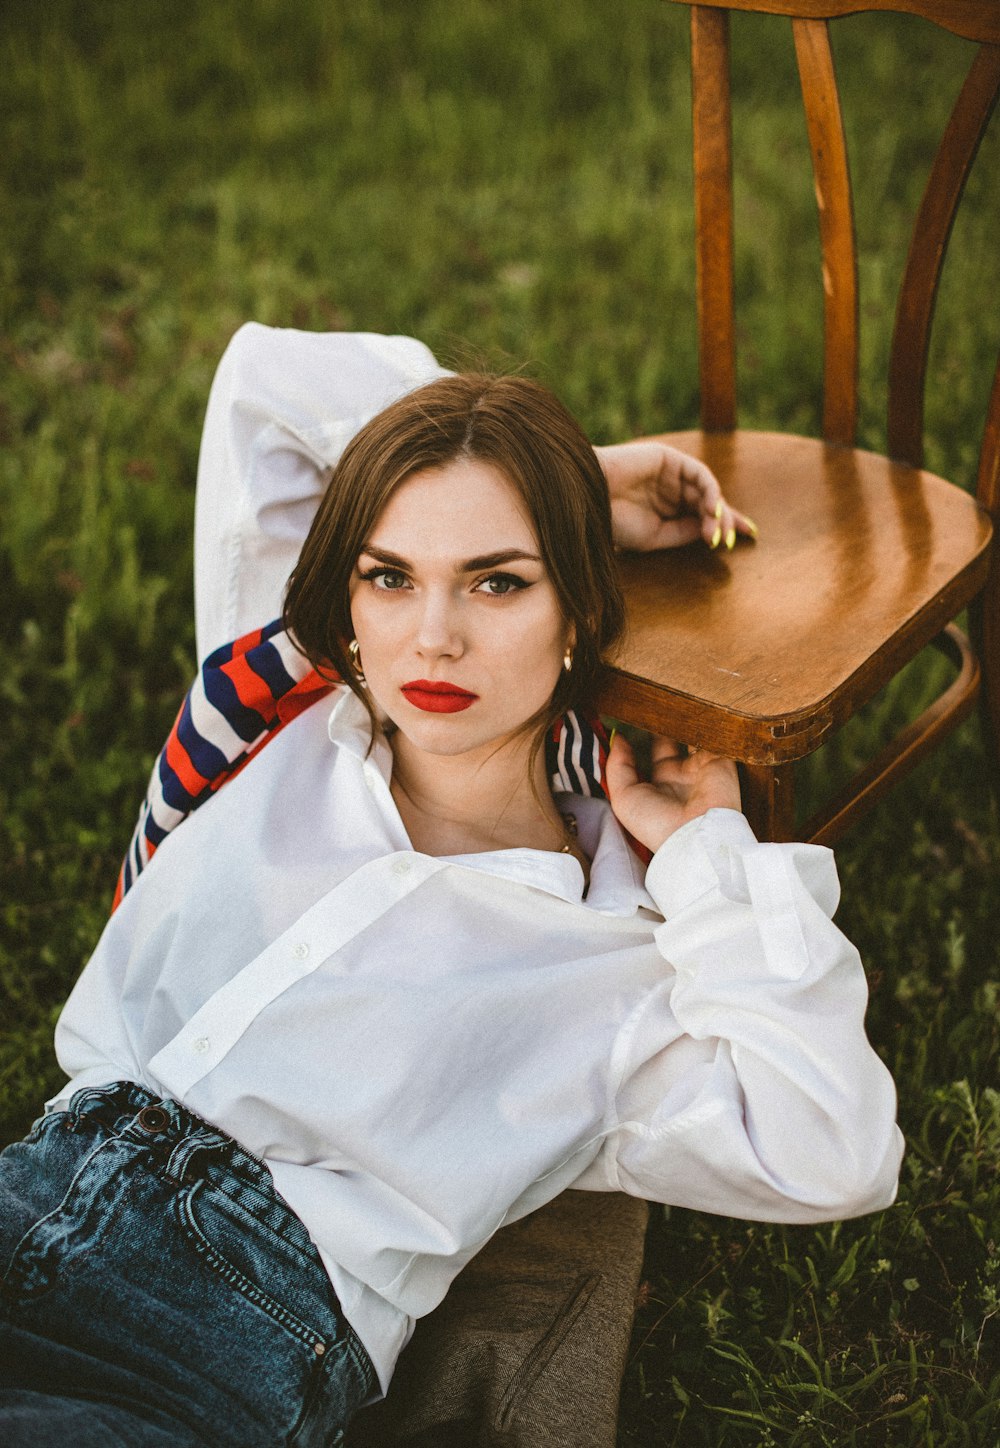 woman in white long sleeve shirt sitting on brown wooden chair